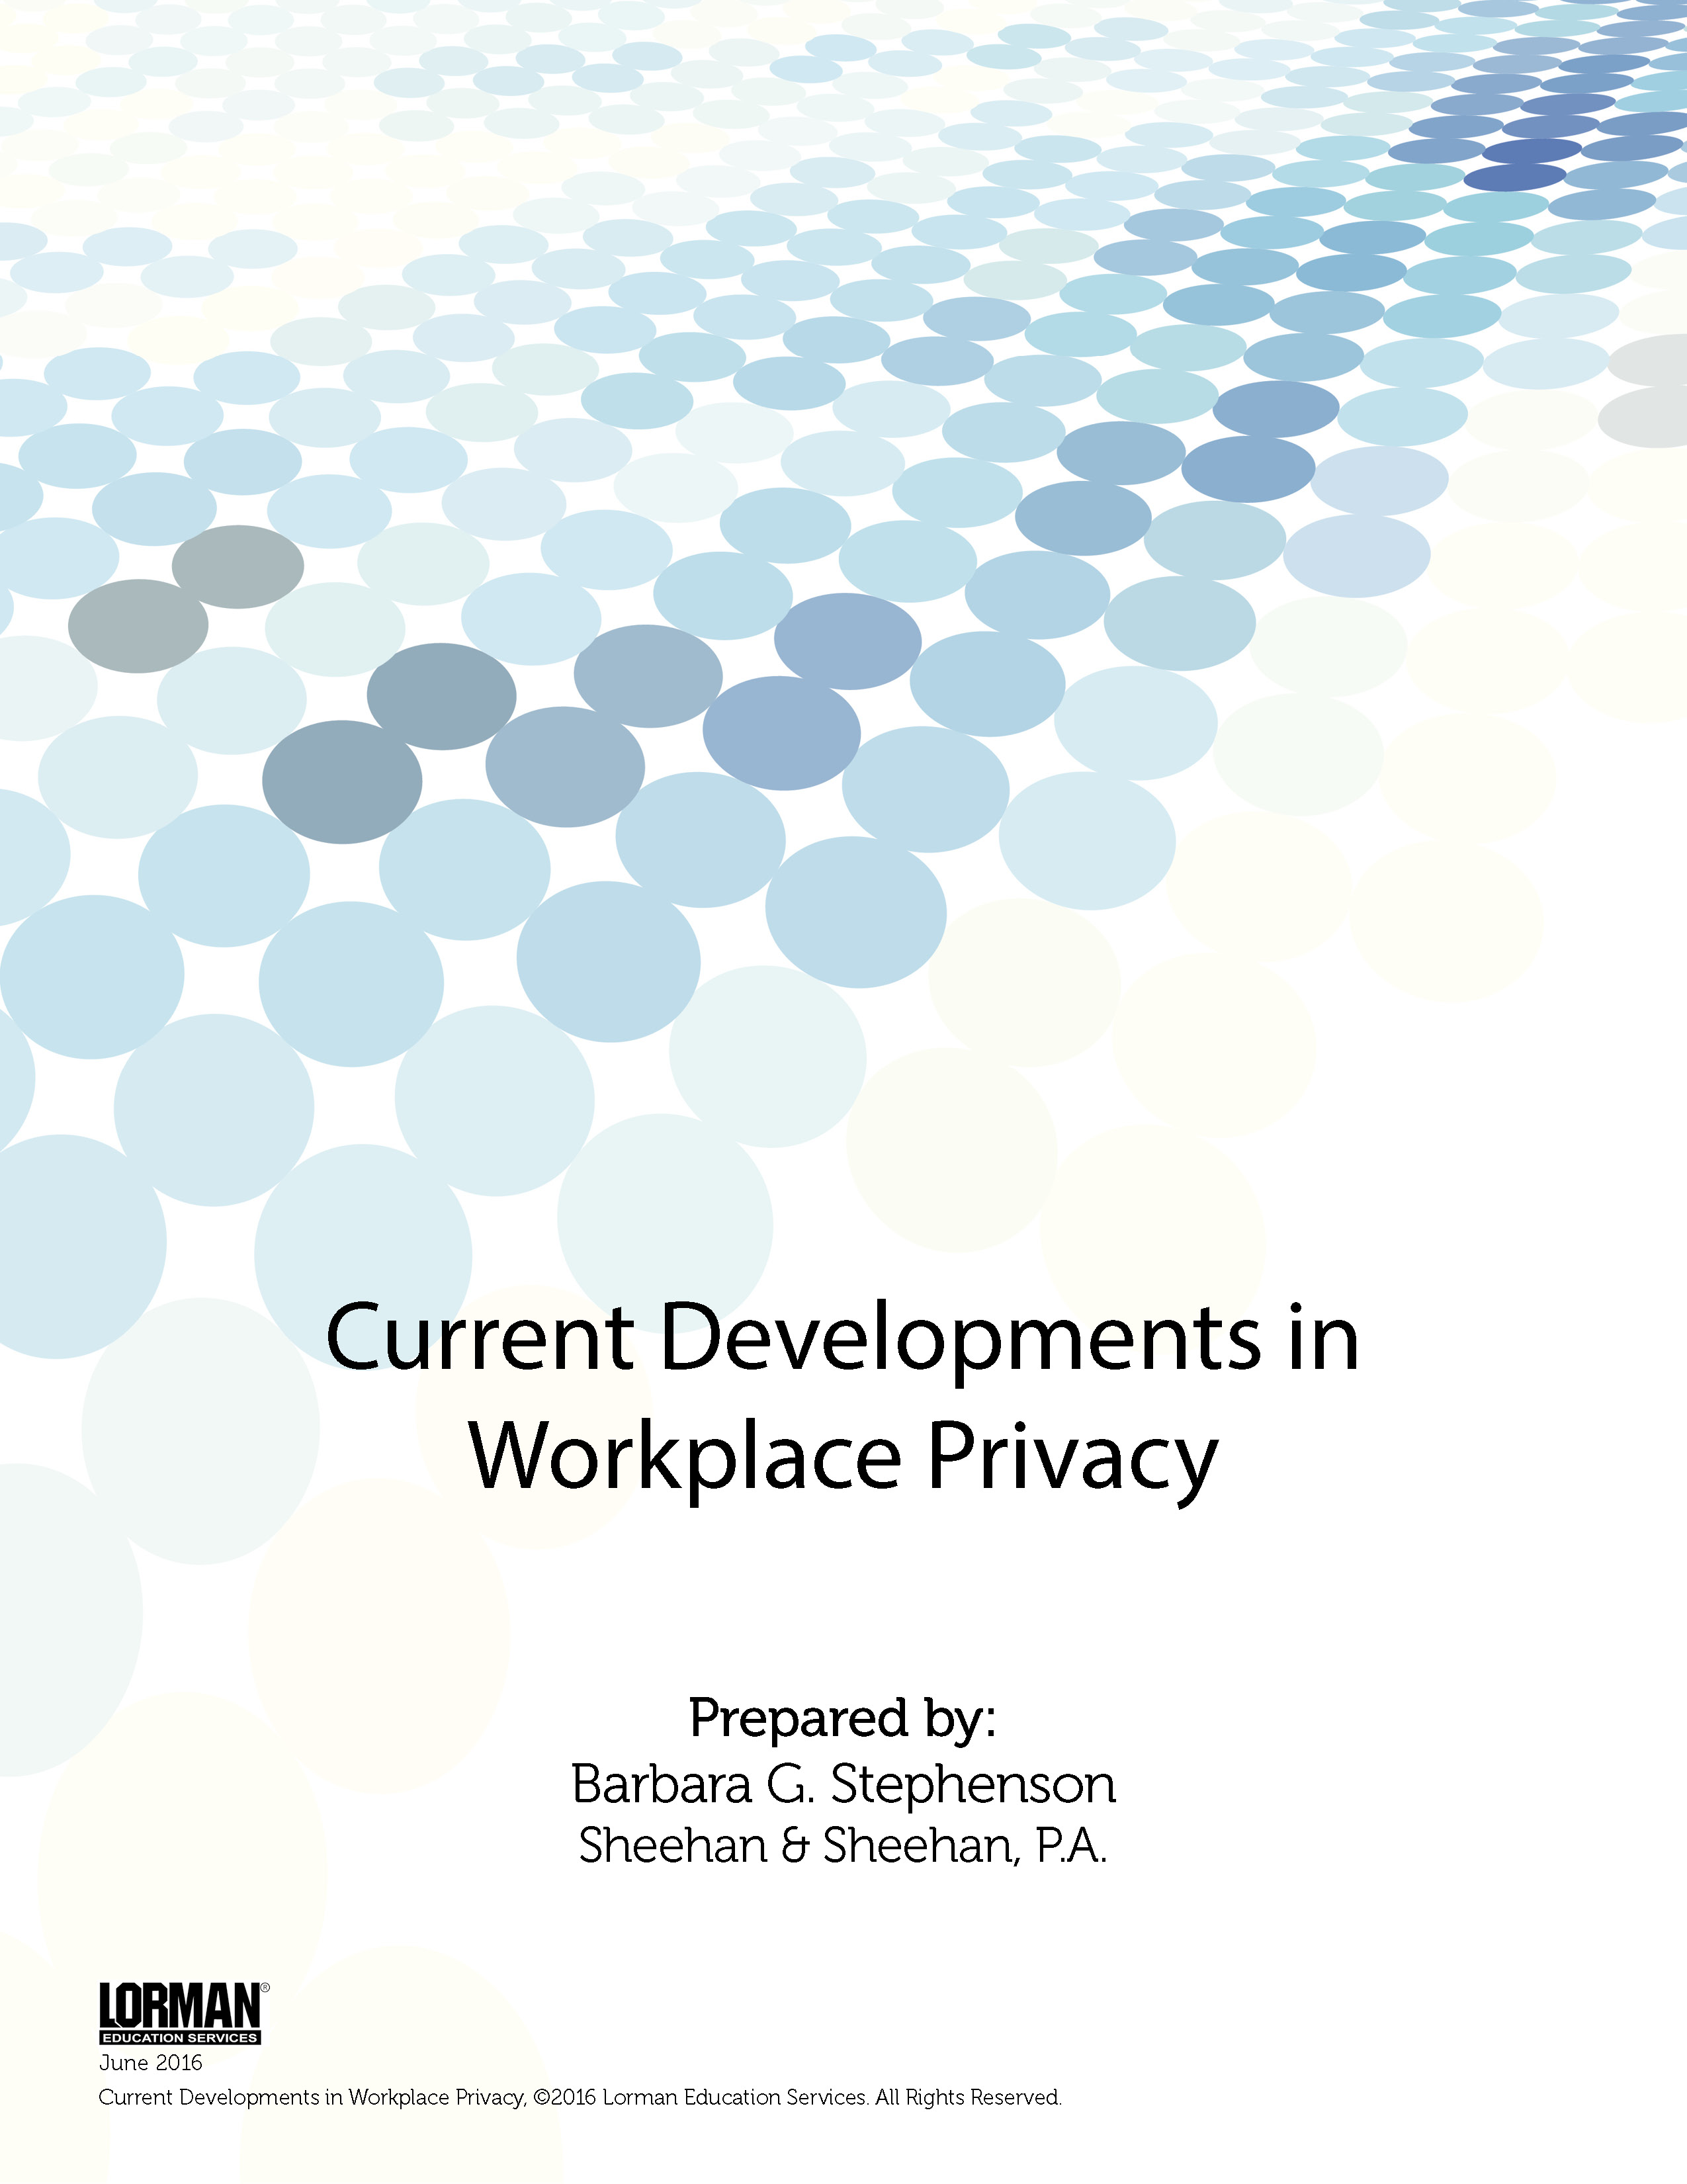 Current Developments in Workplace Privacy